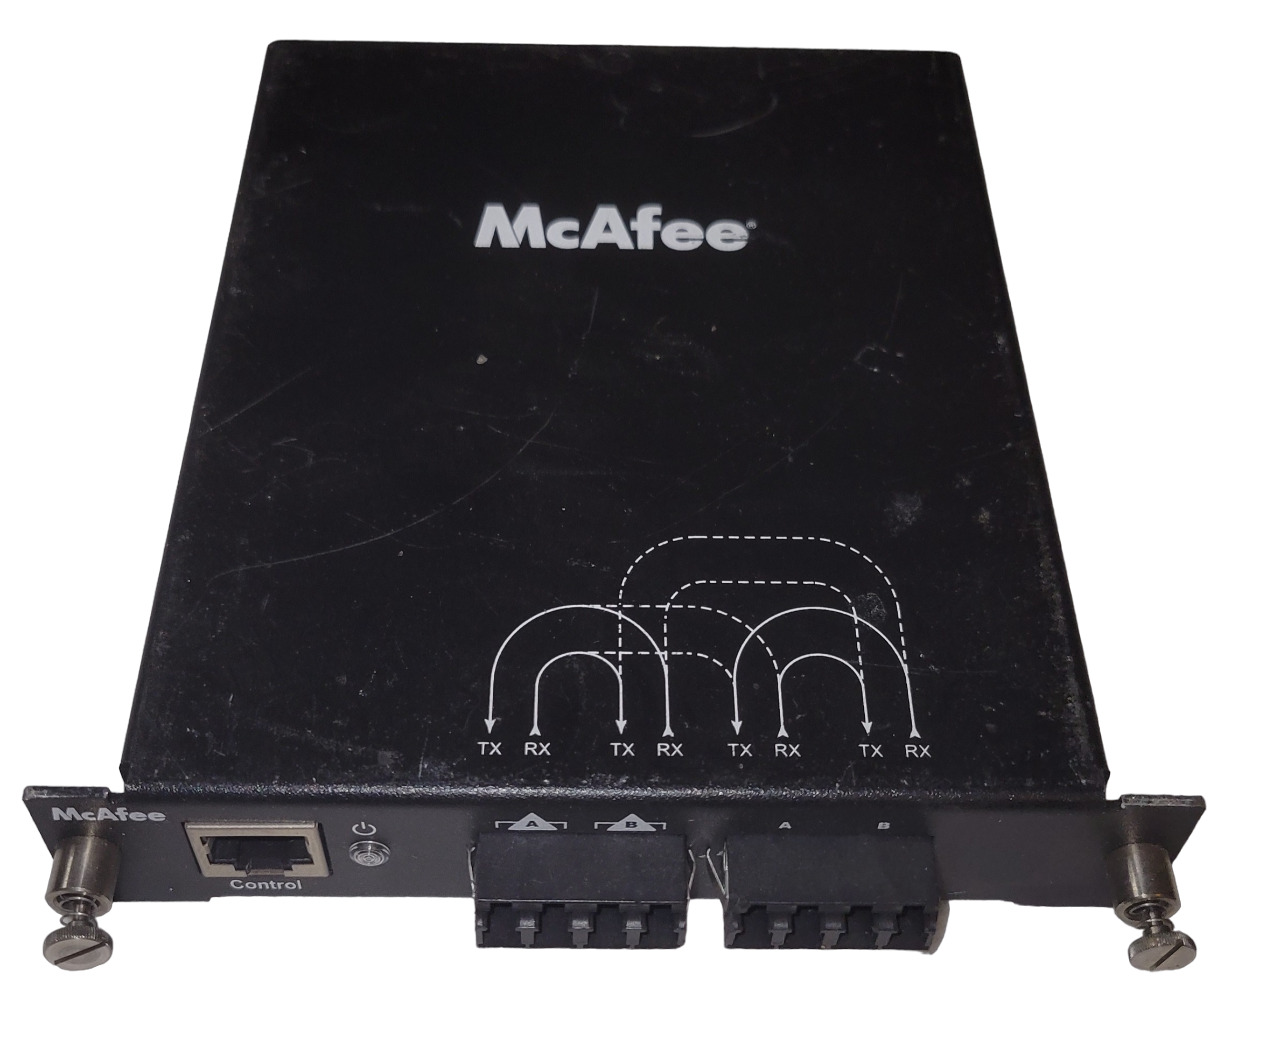 McAfee Control Network Monitor 222-0003-00-G5 MISSING AC ADAPTER/CABLES Used